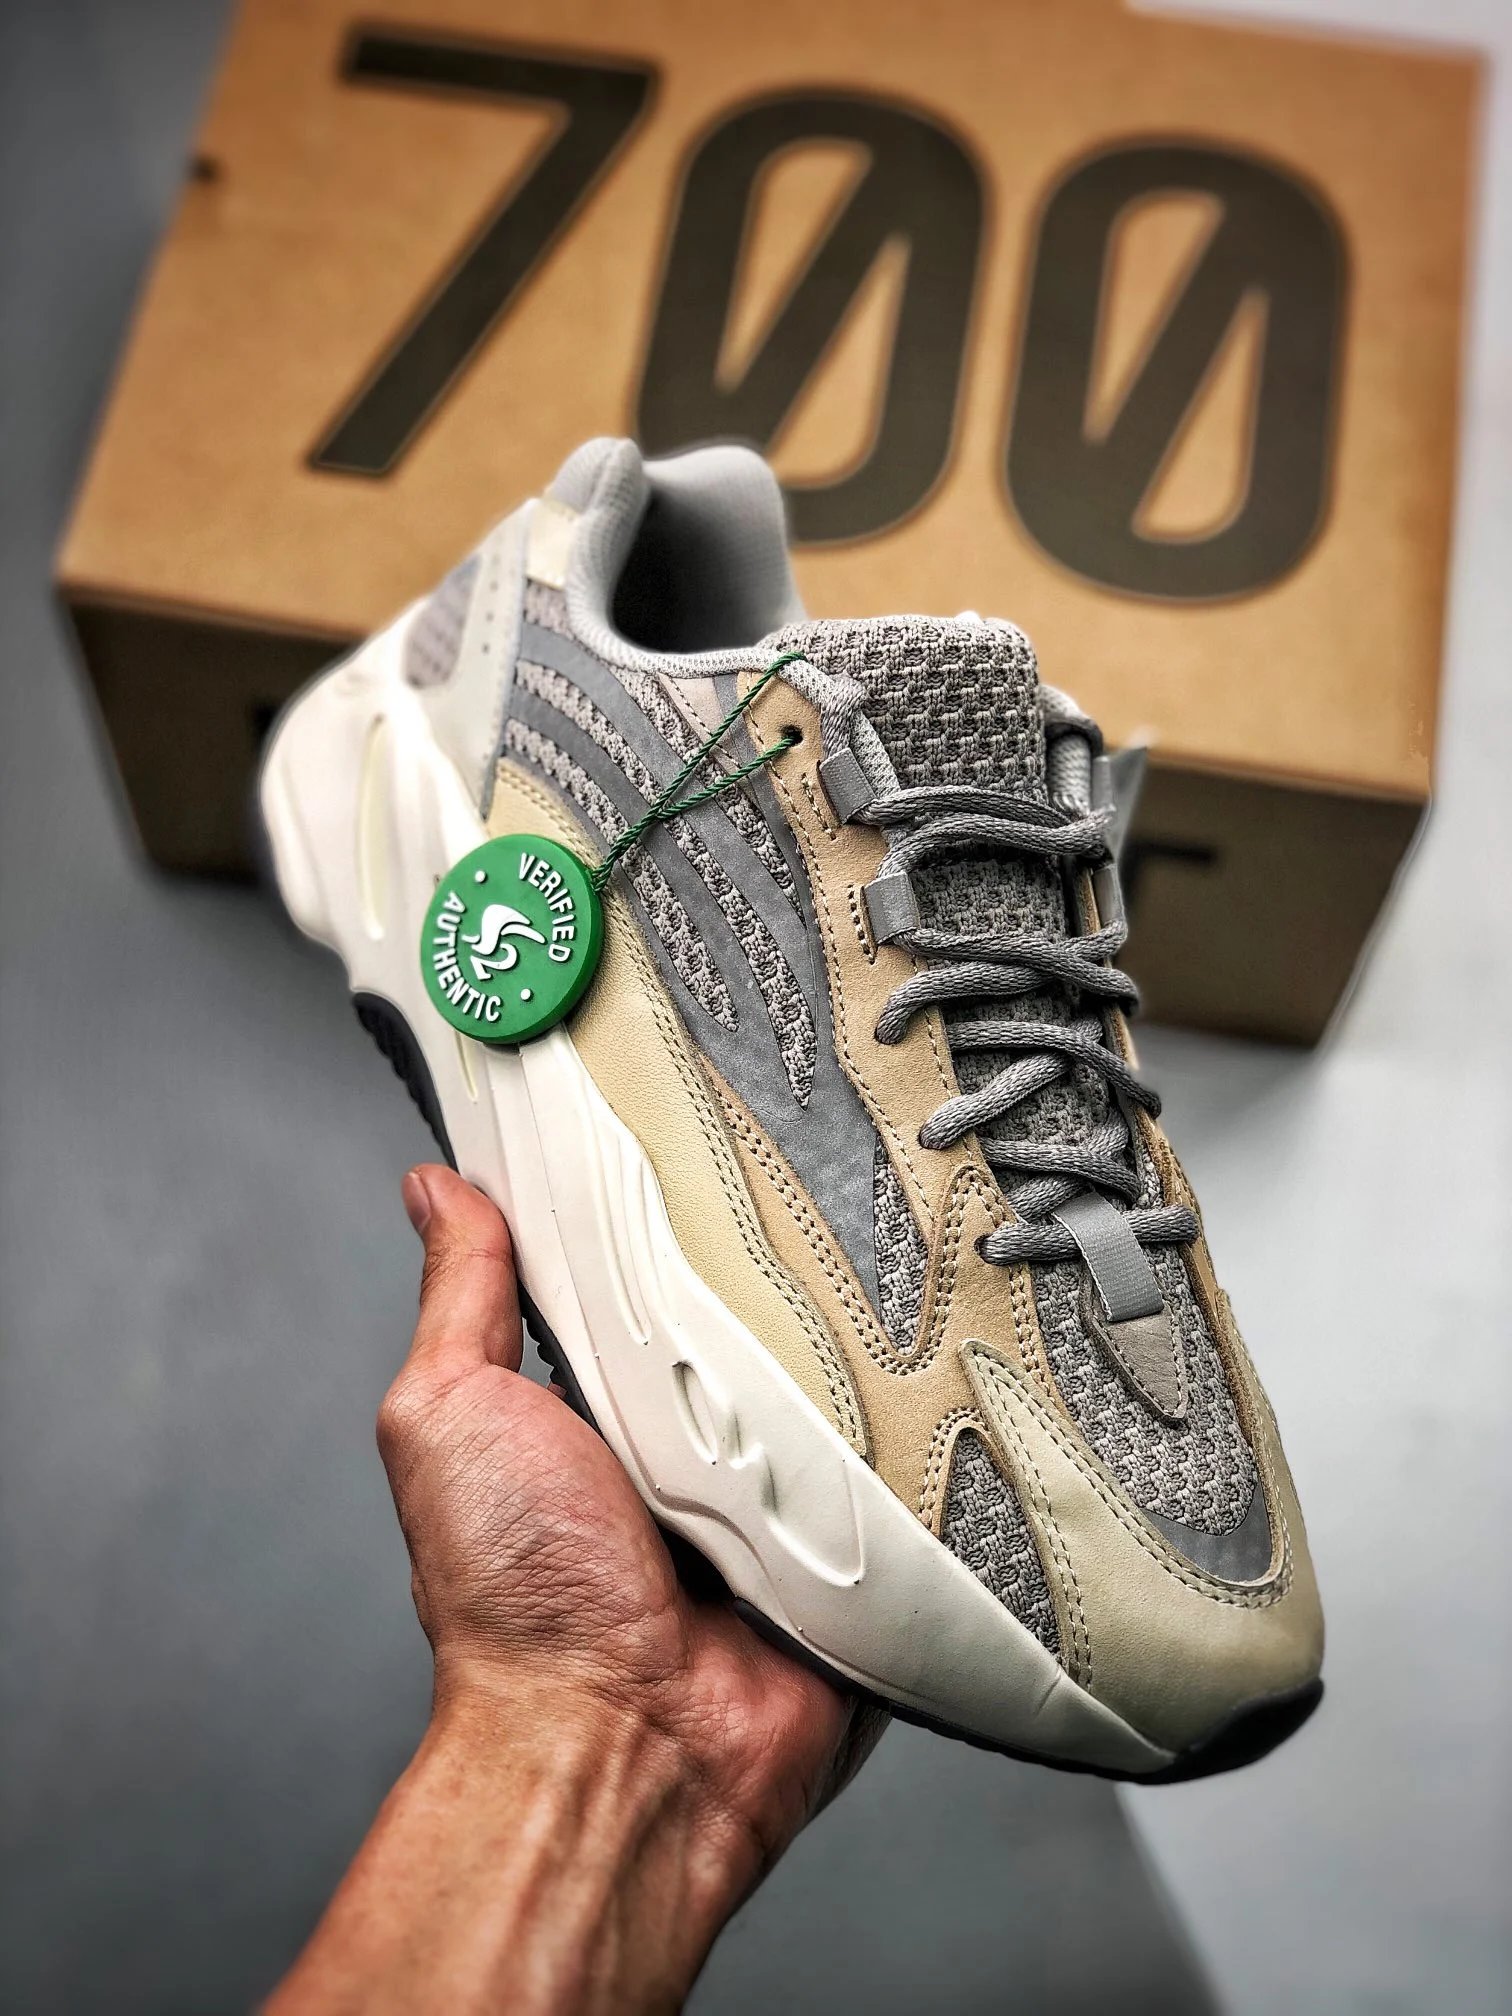 Adidas Yeezy Boost 700 V2 Cream GY7924 For Sale